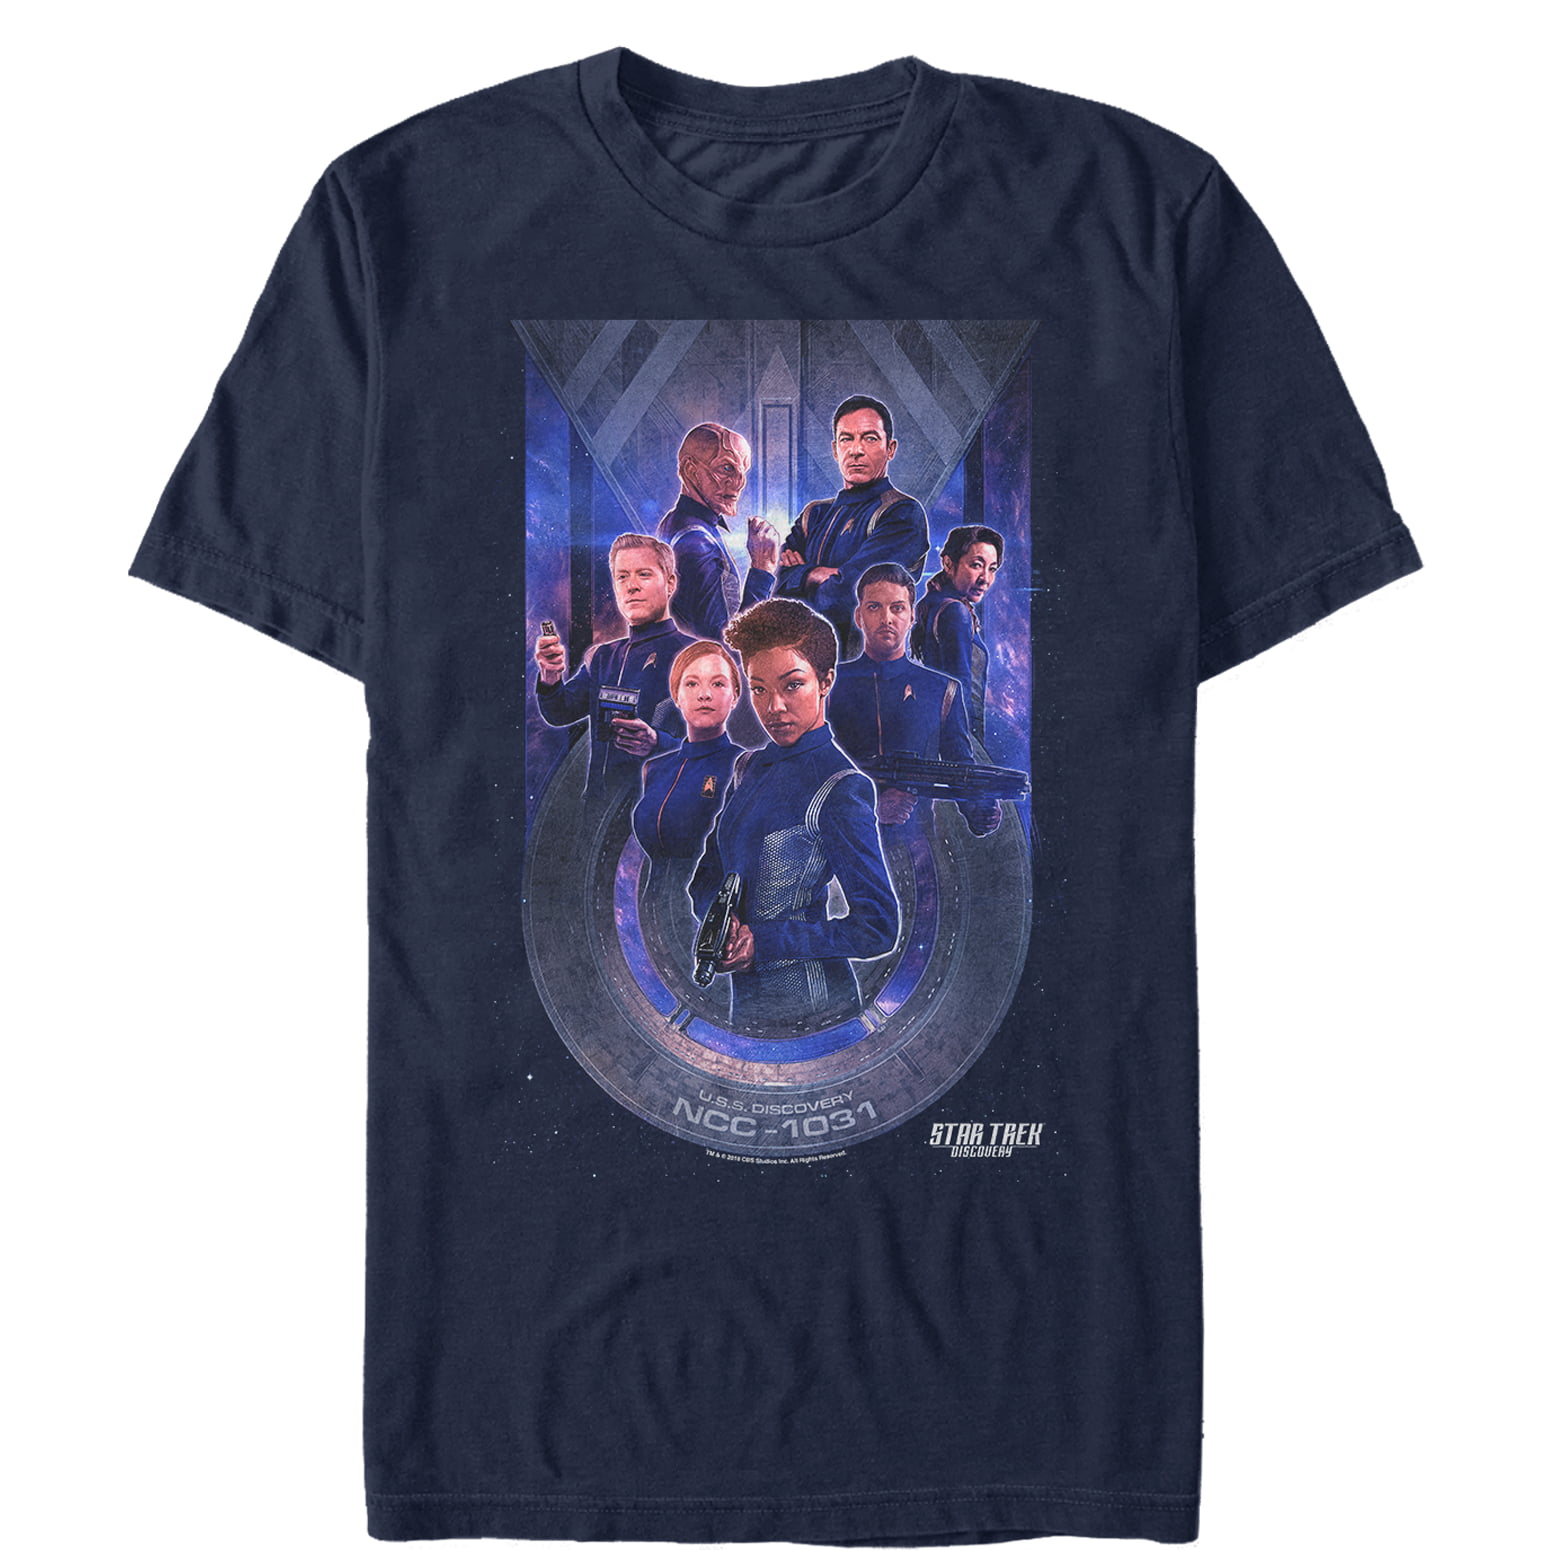 star trek discovery red shirts